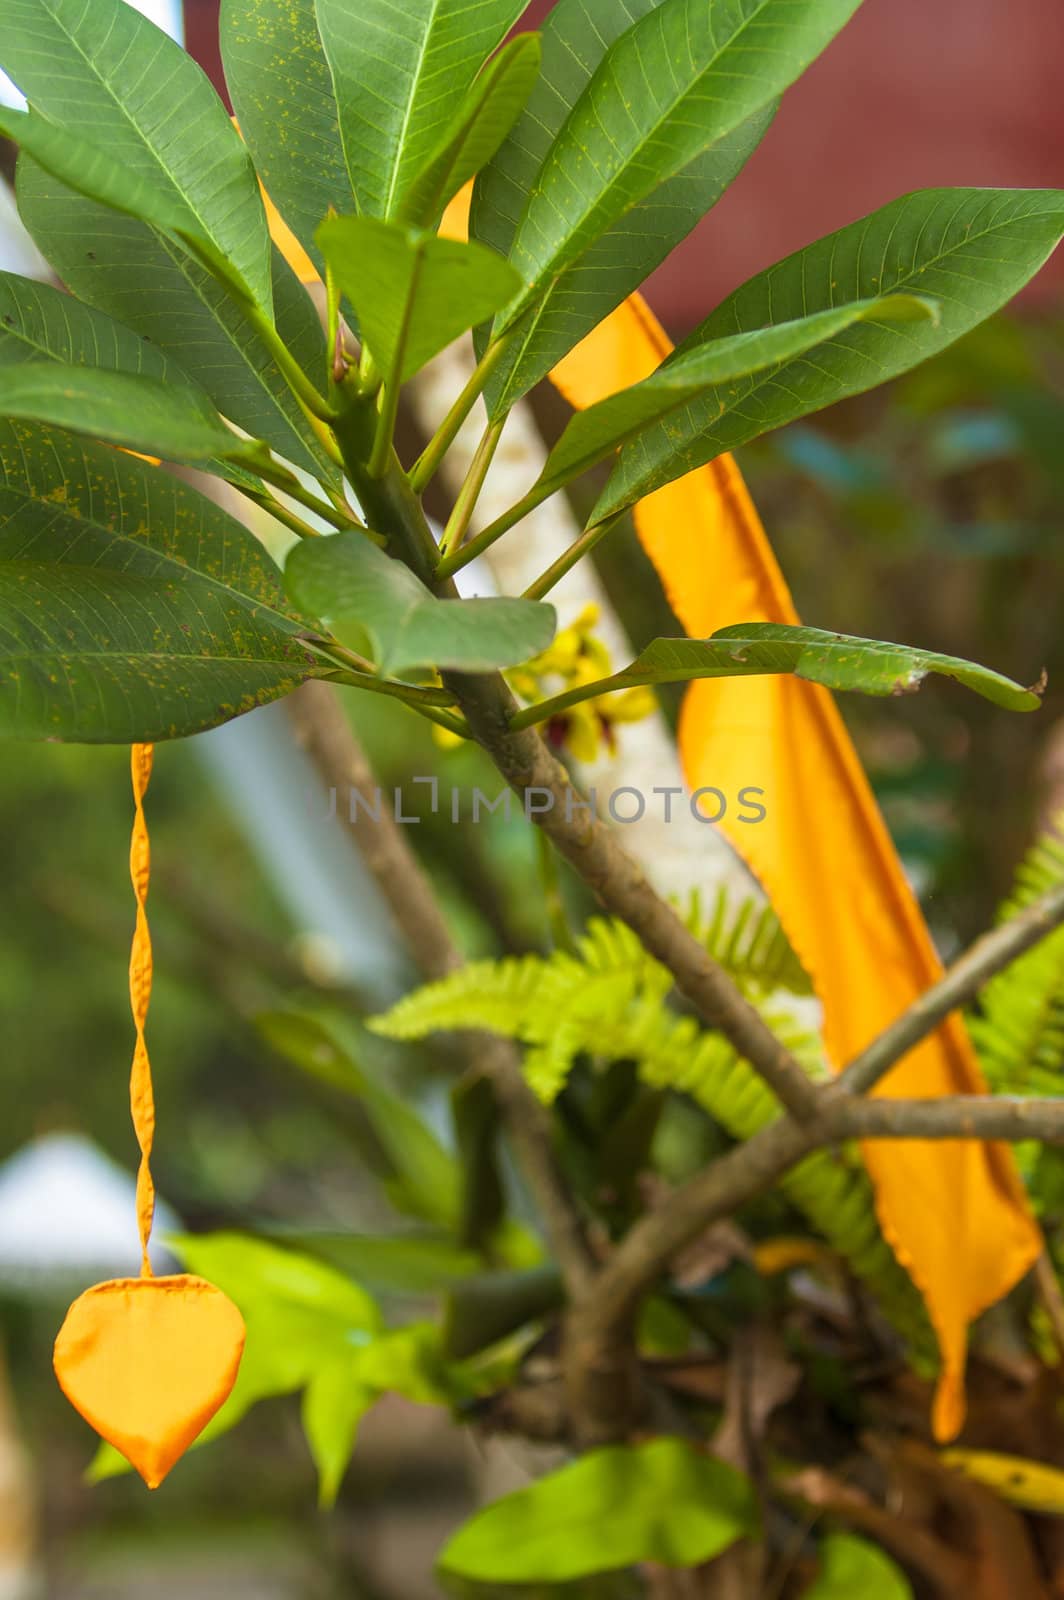 Balinese yellow heart ornament hanging from a plant